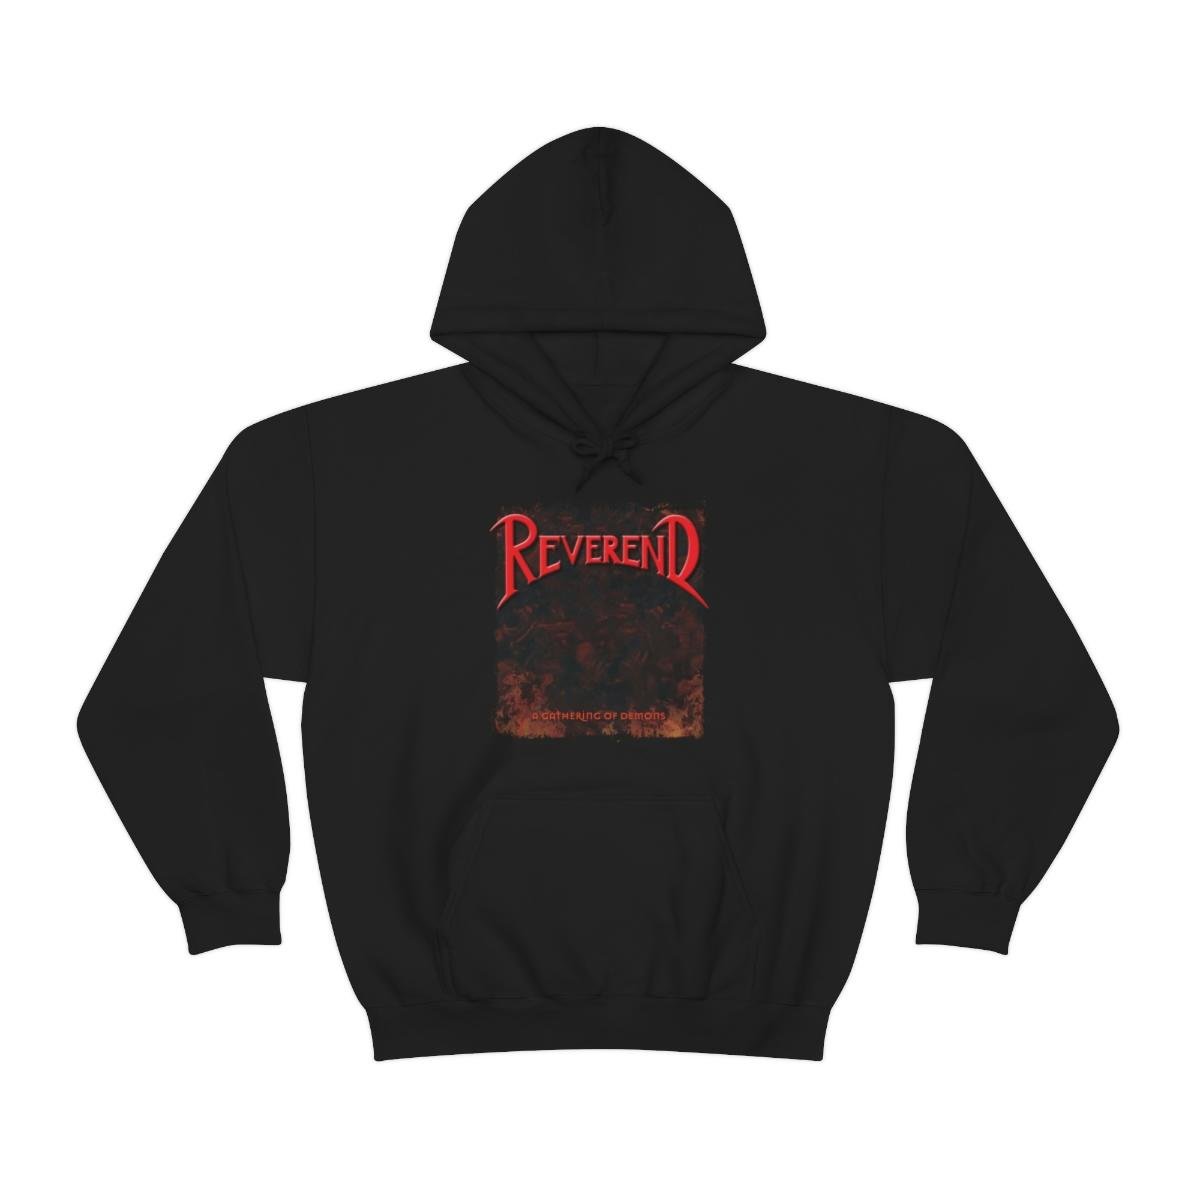 Reverend – A Gathering Of Demons New Cover Pullover Hooded Sweatshirt